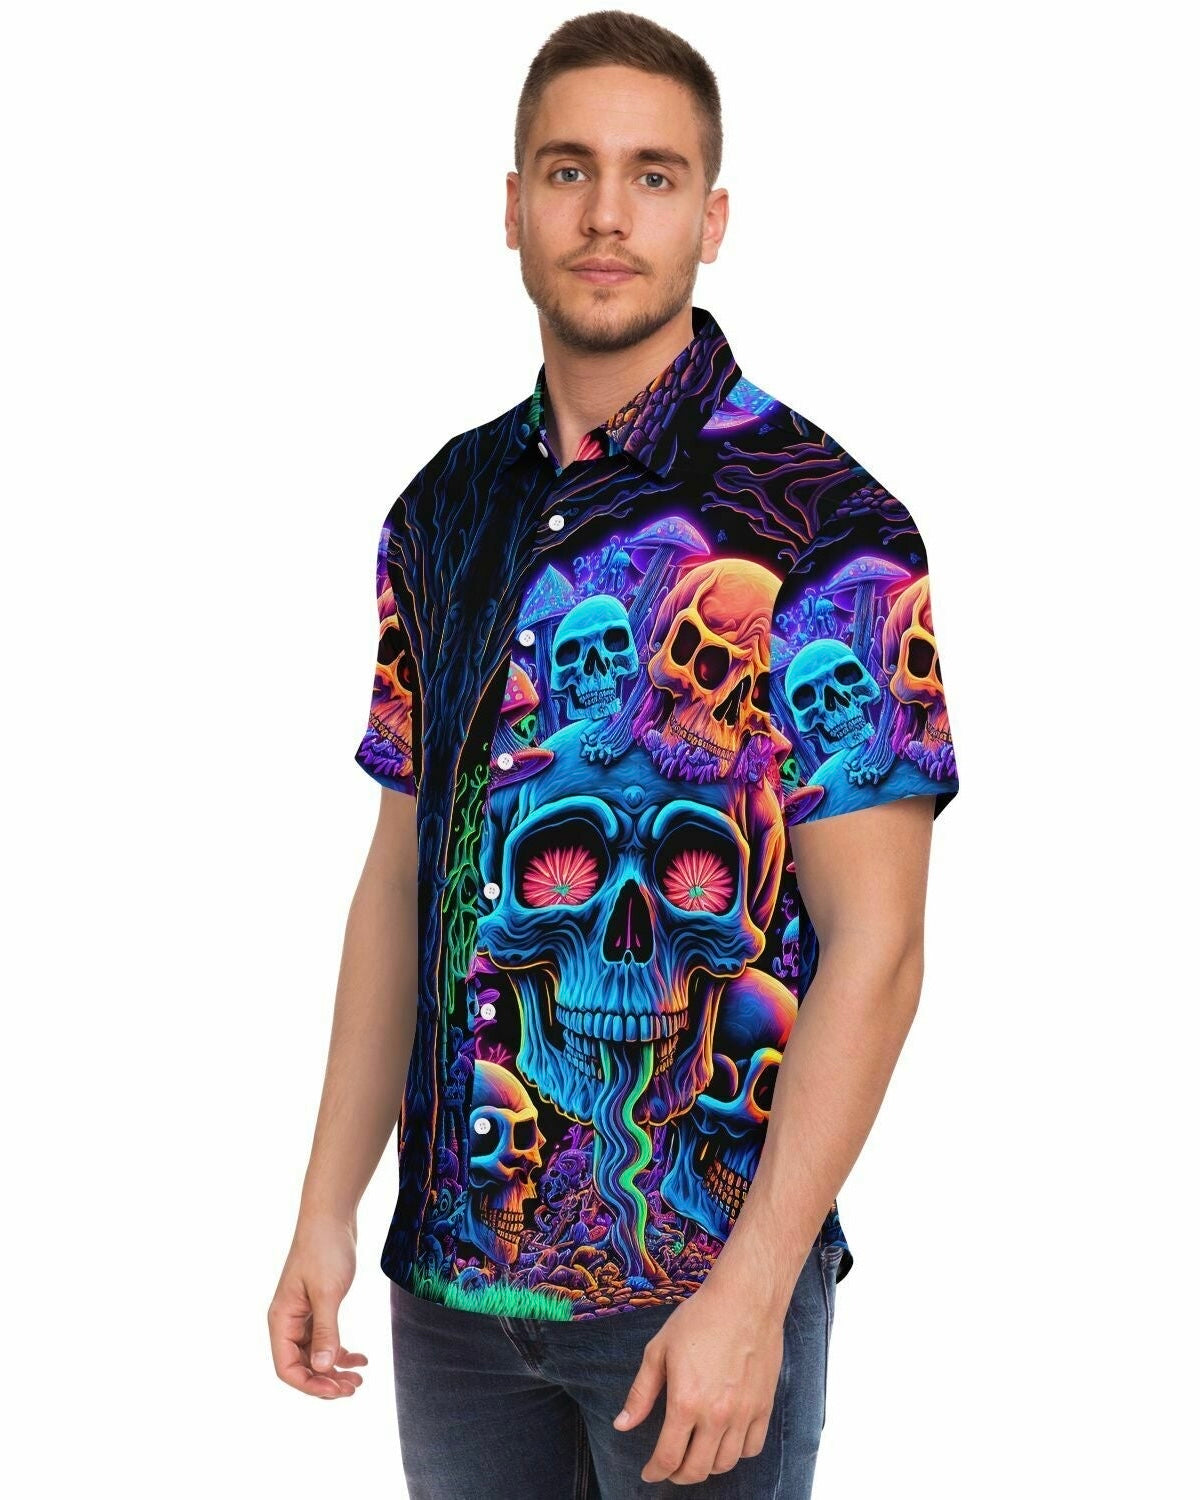 Psychedelic Skull Sanctuary Party Shirt